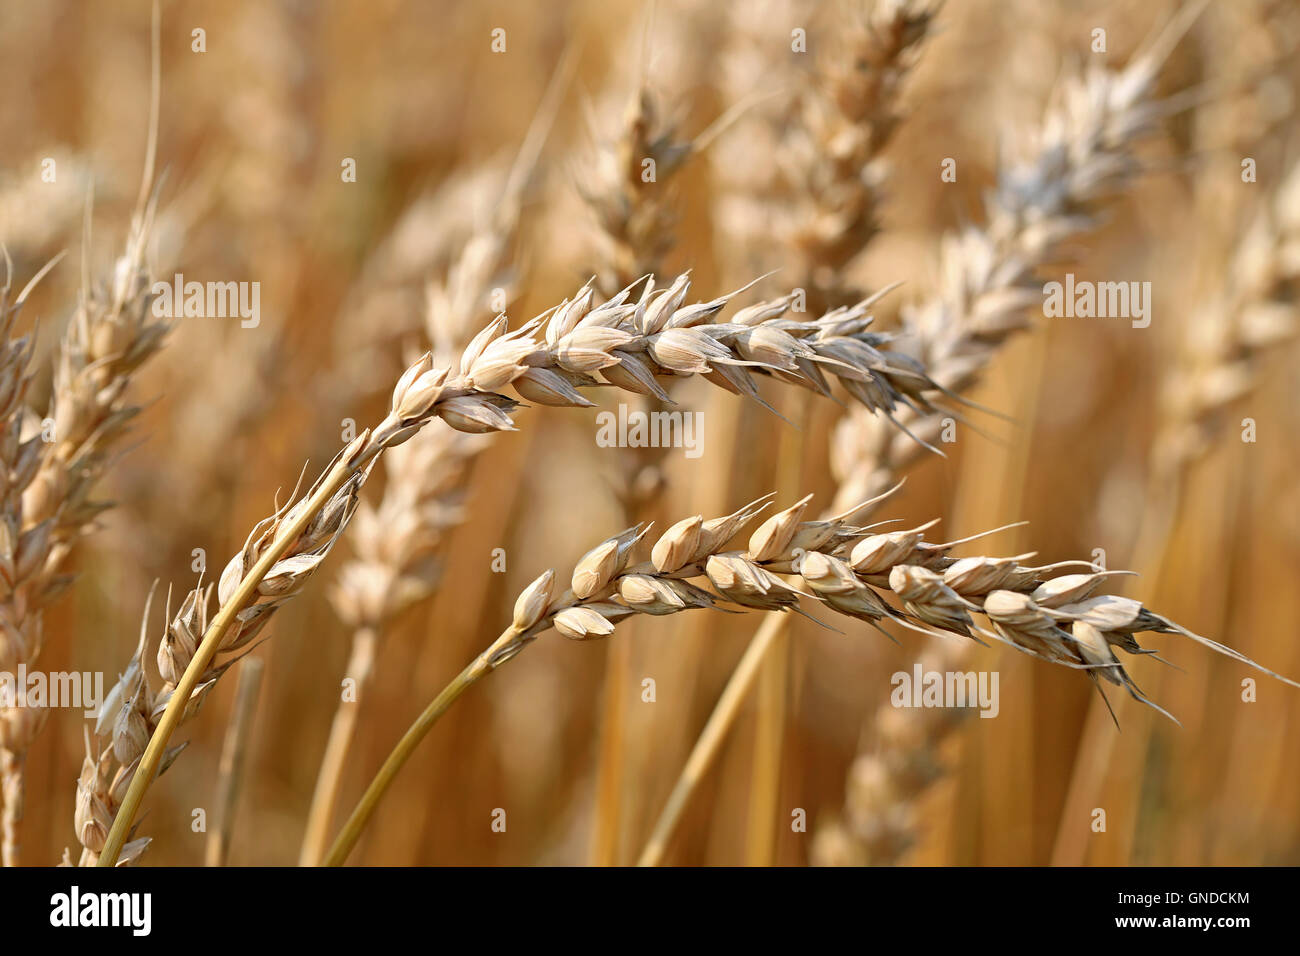 Close up of two ears of ripe wheat growing on a field at harvest time in early autumn. Shallow depth of field. Stock Photo